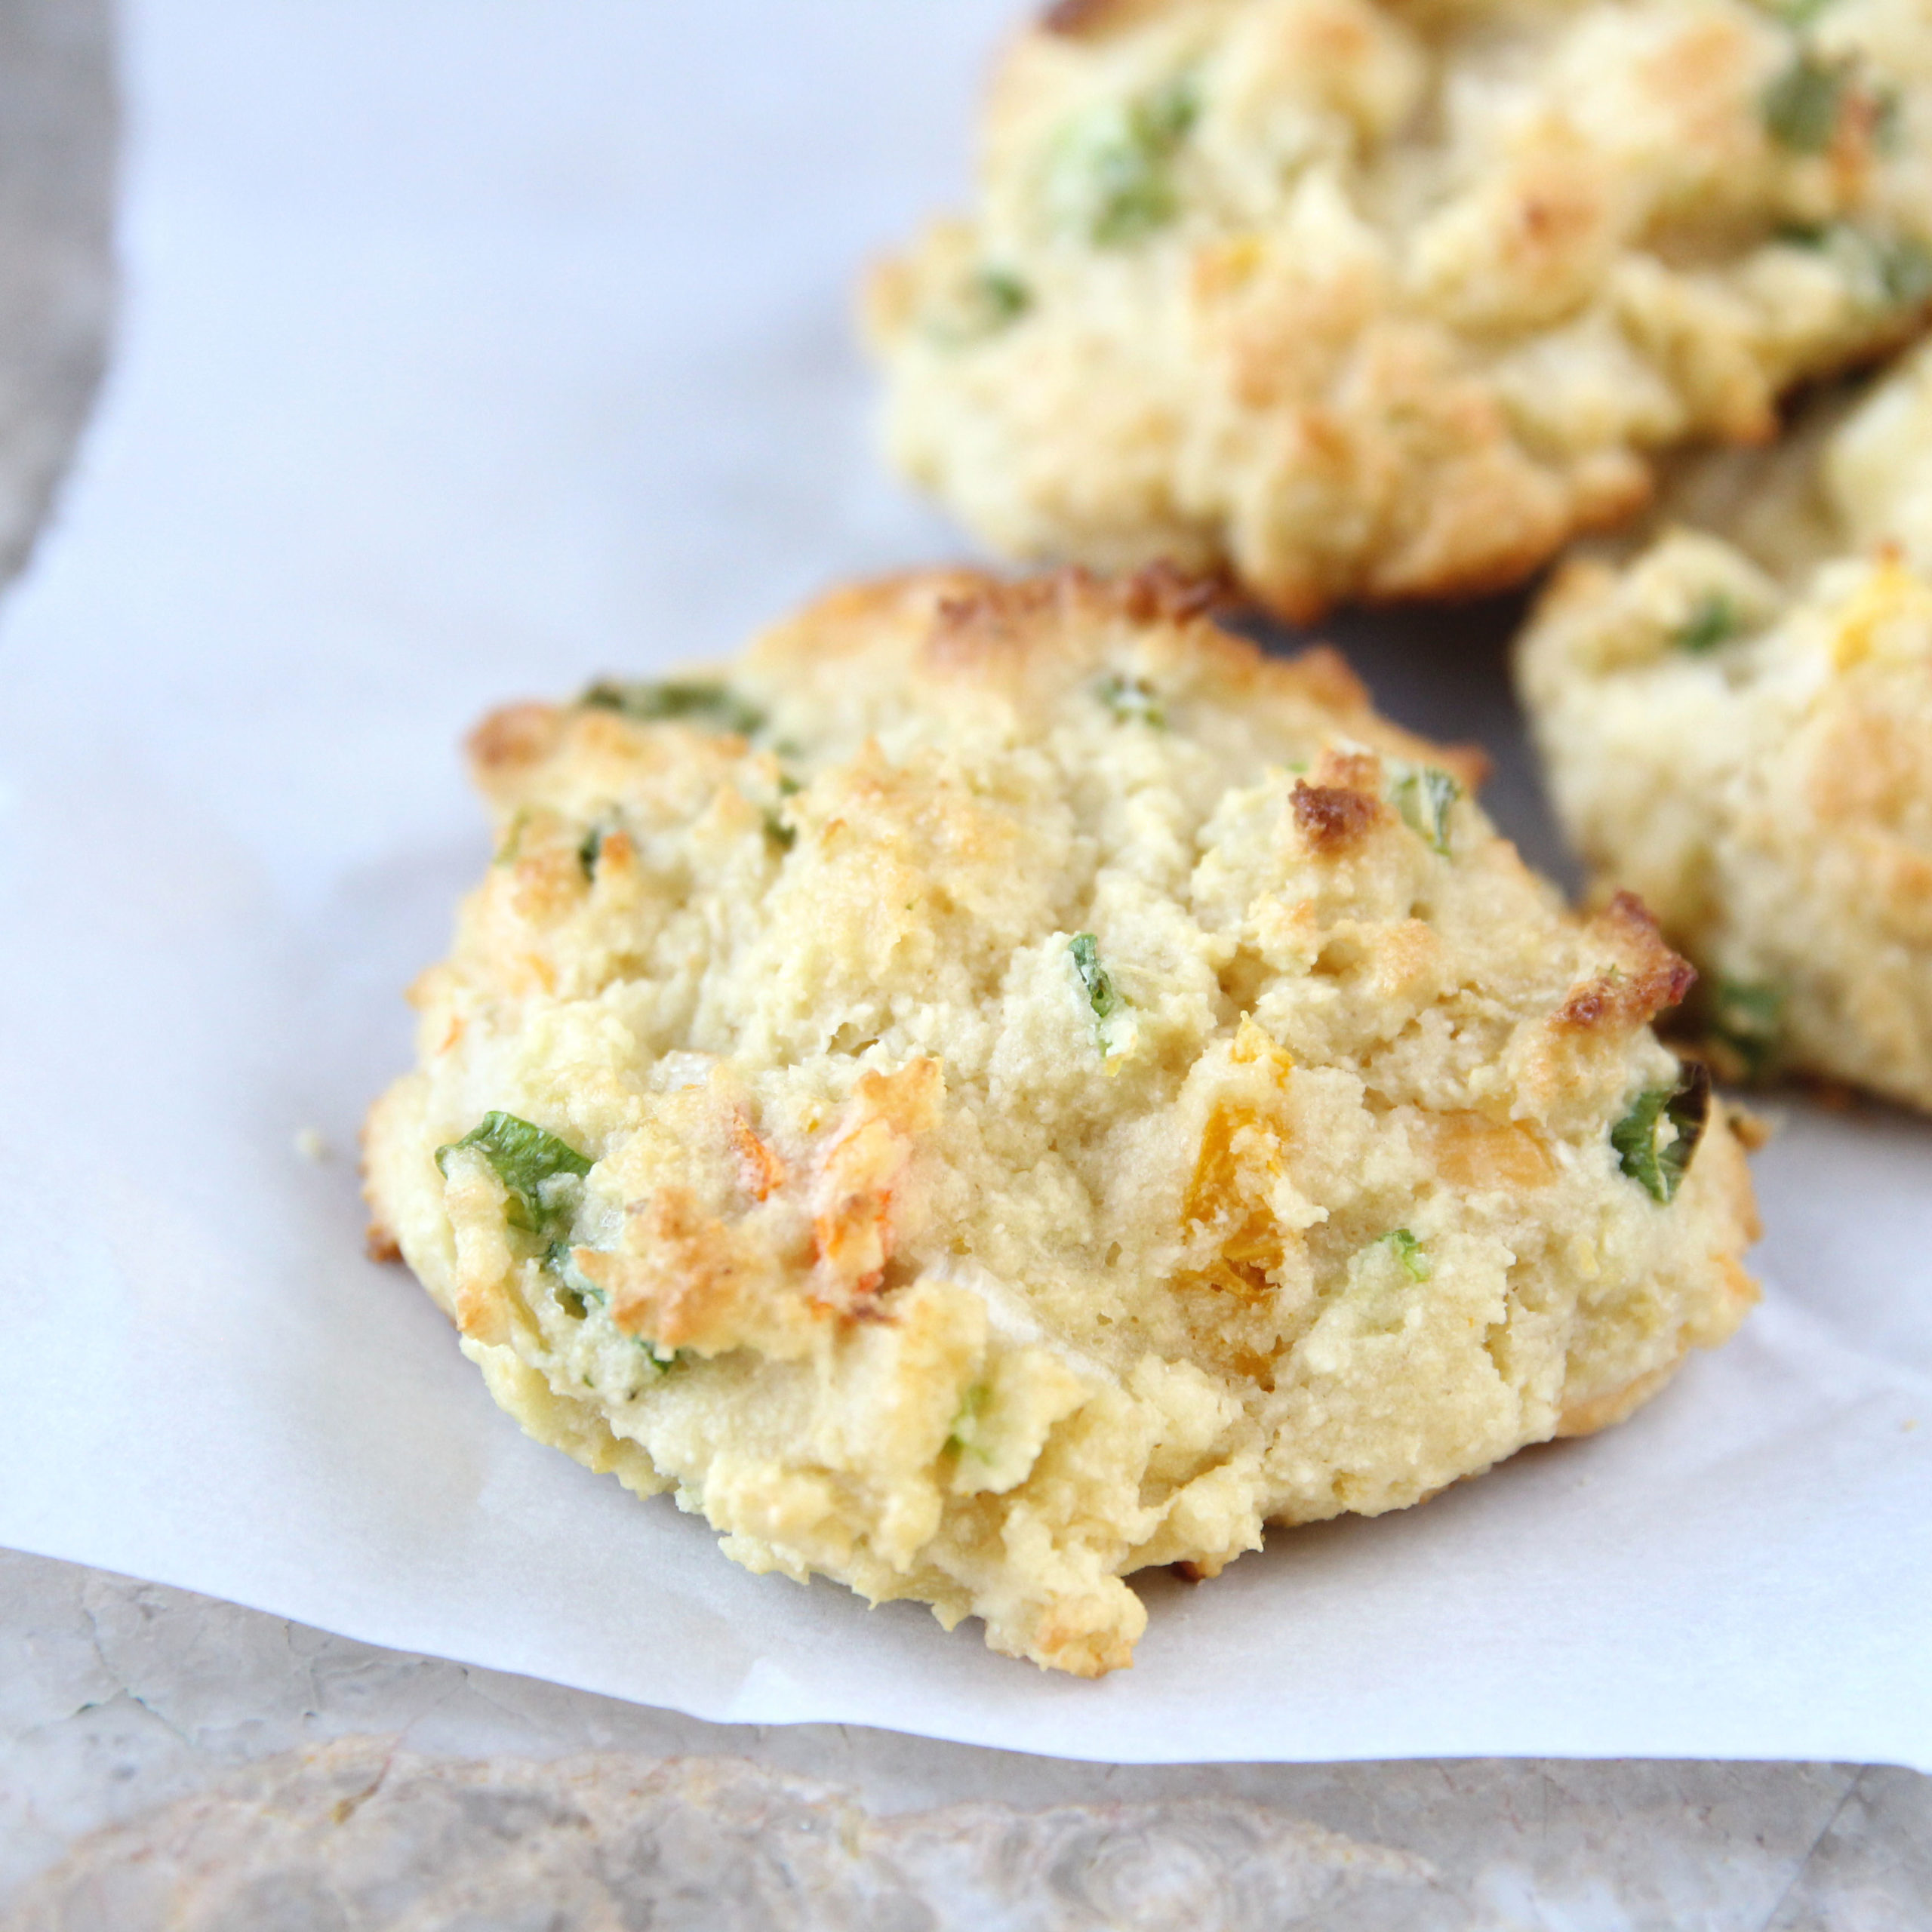 How to Make Gluten-Free Cheddar Drop Biscuits made with Cauliflower - cashew butter pesto